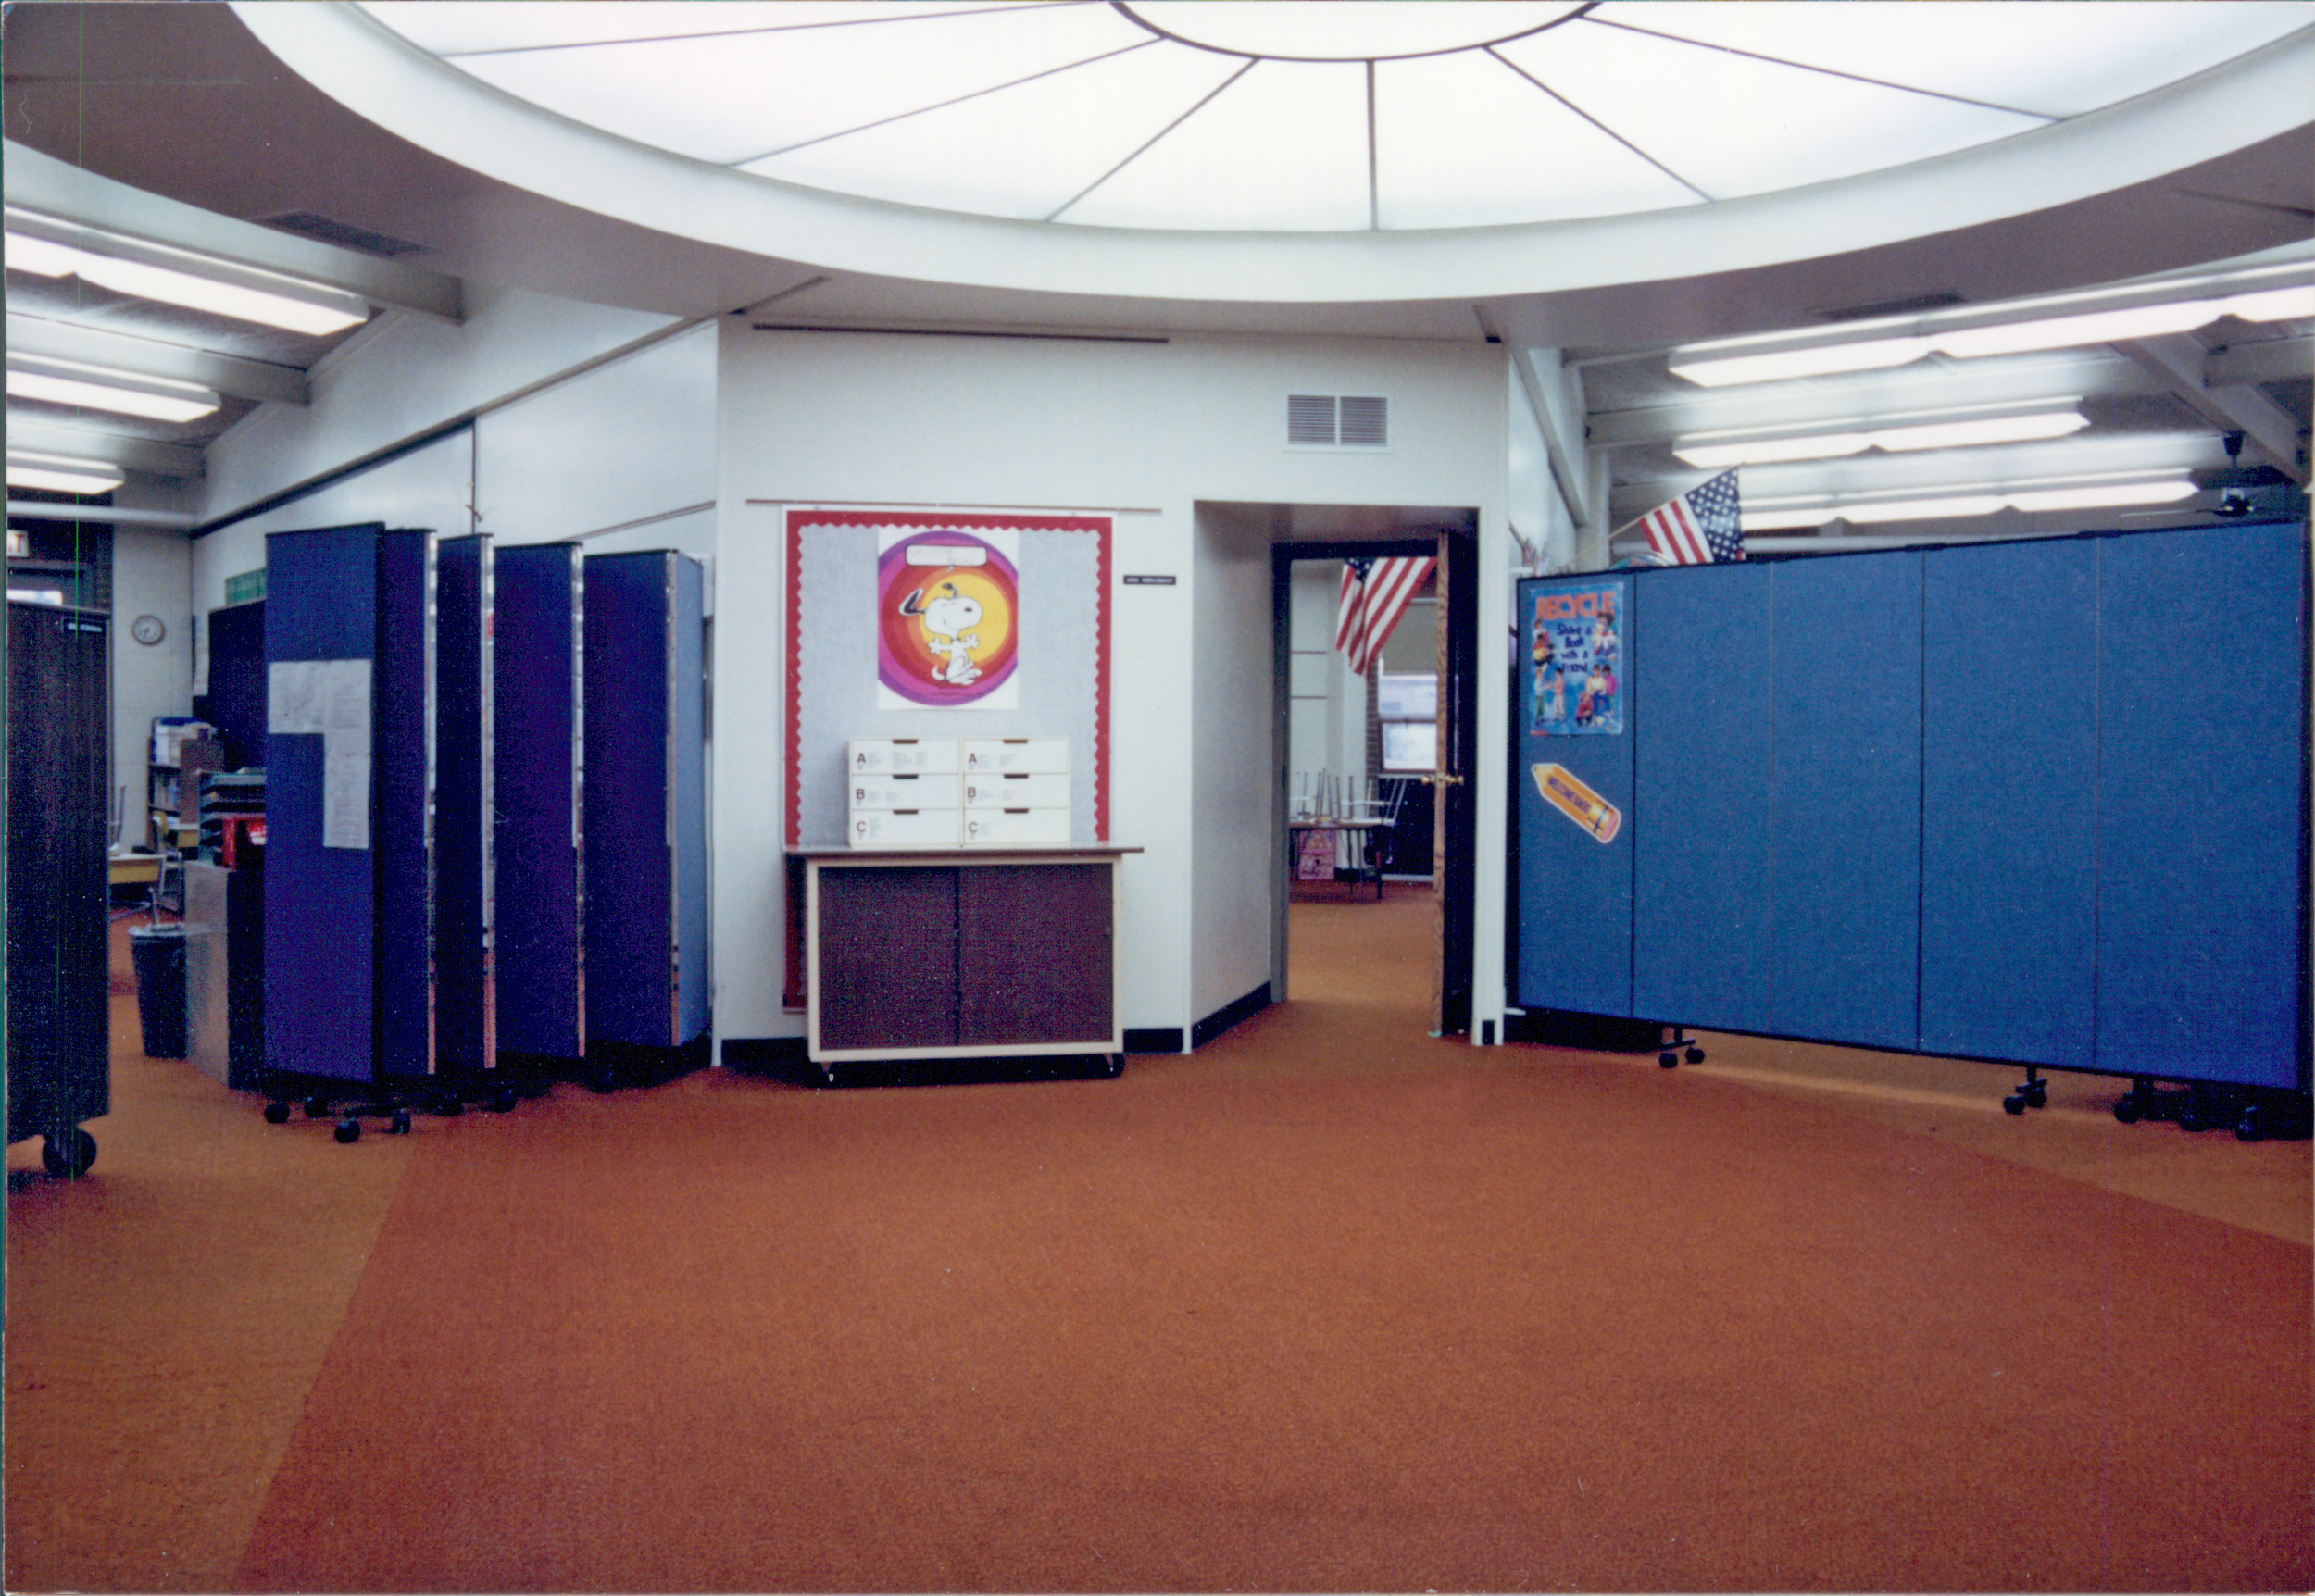 This Addison, IL Pod school uses Wallmount Dividers to separate each classroom from the commons area